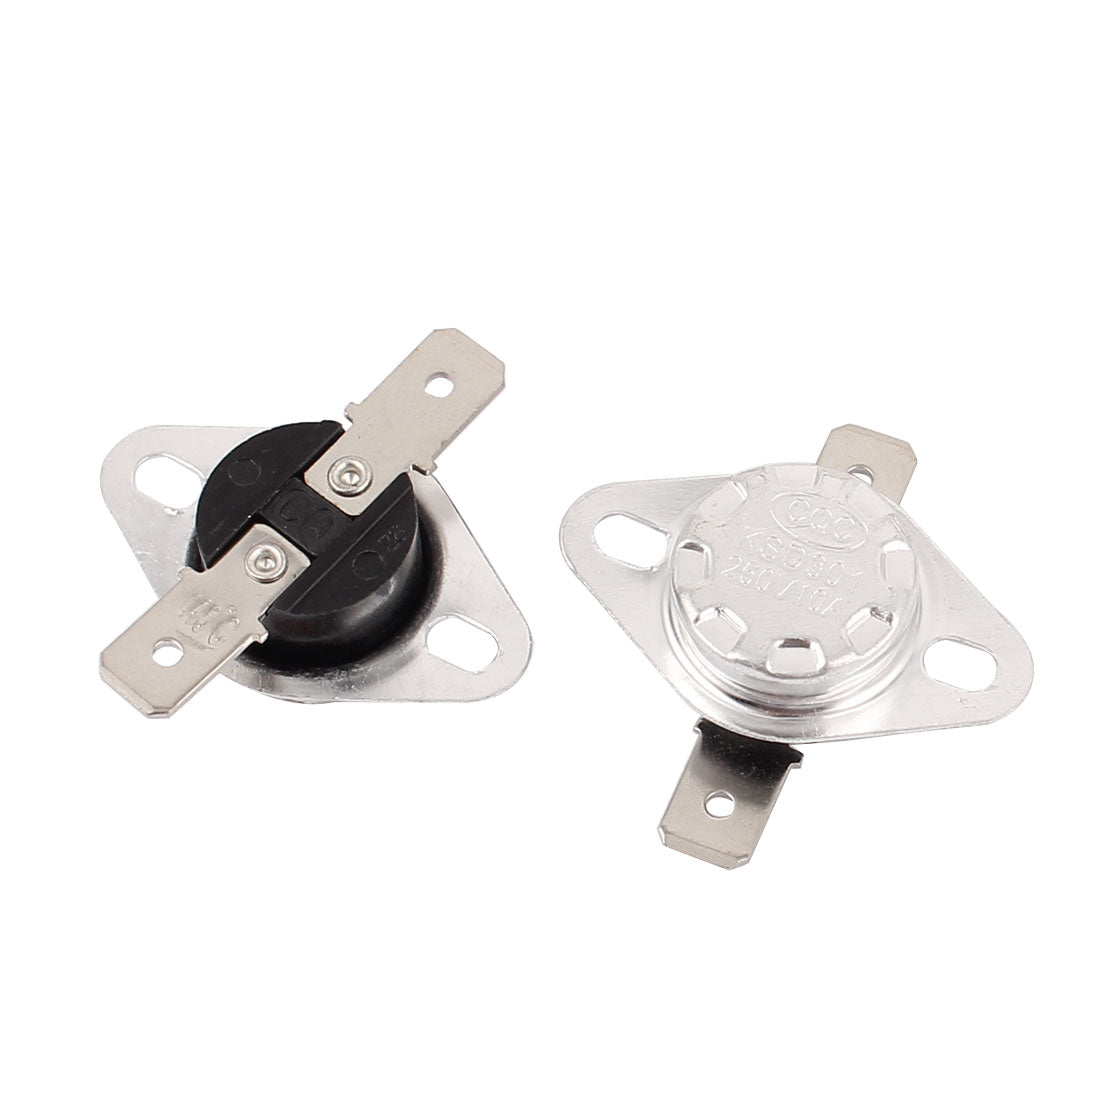 Uxcell Uxcell 2 Pcs KSD301 Temperature Control Switch Thermostats 250VAC 10A 145 Celsius N.C.